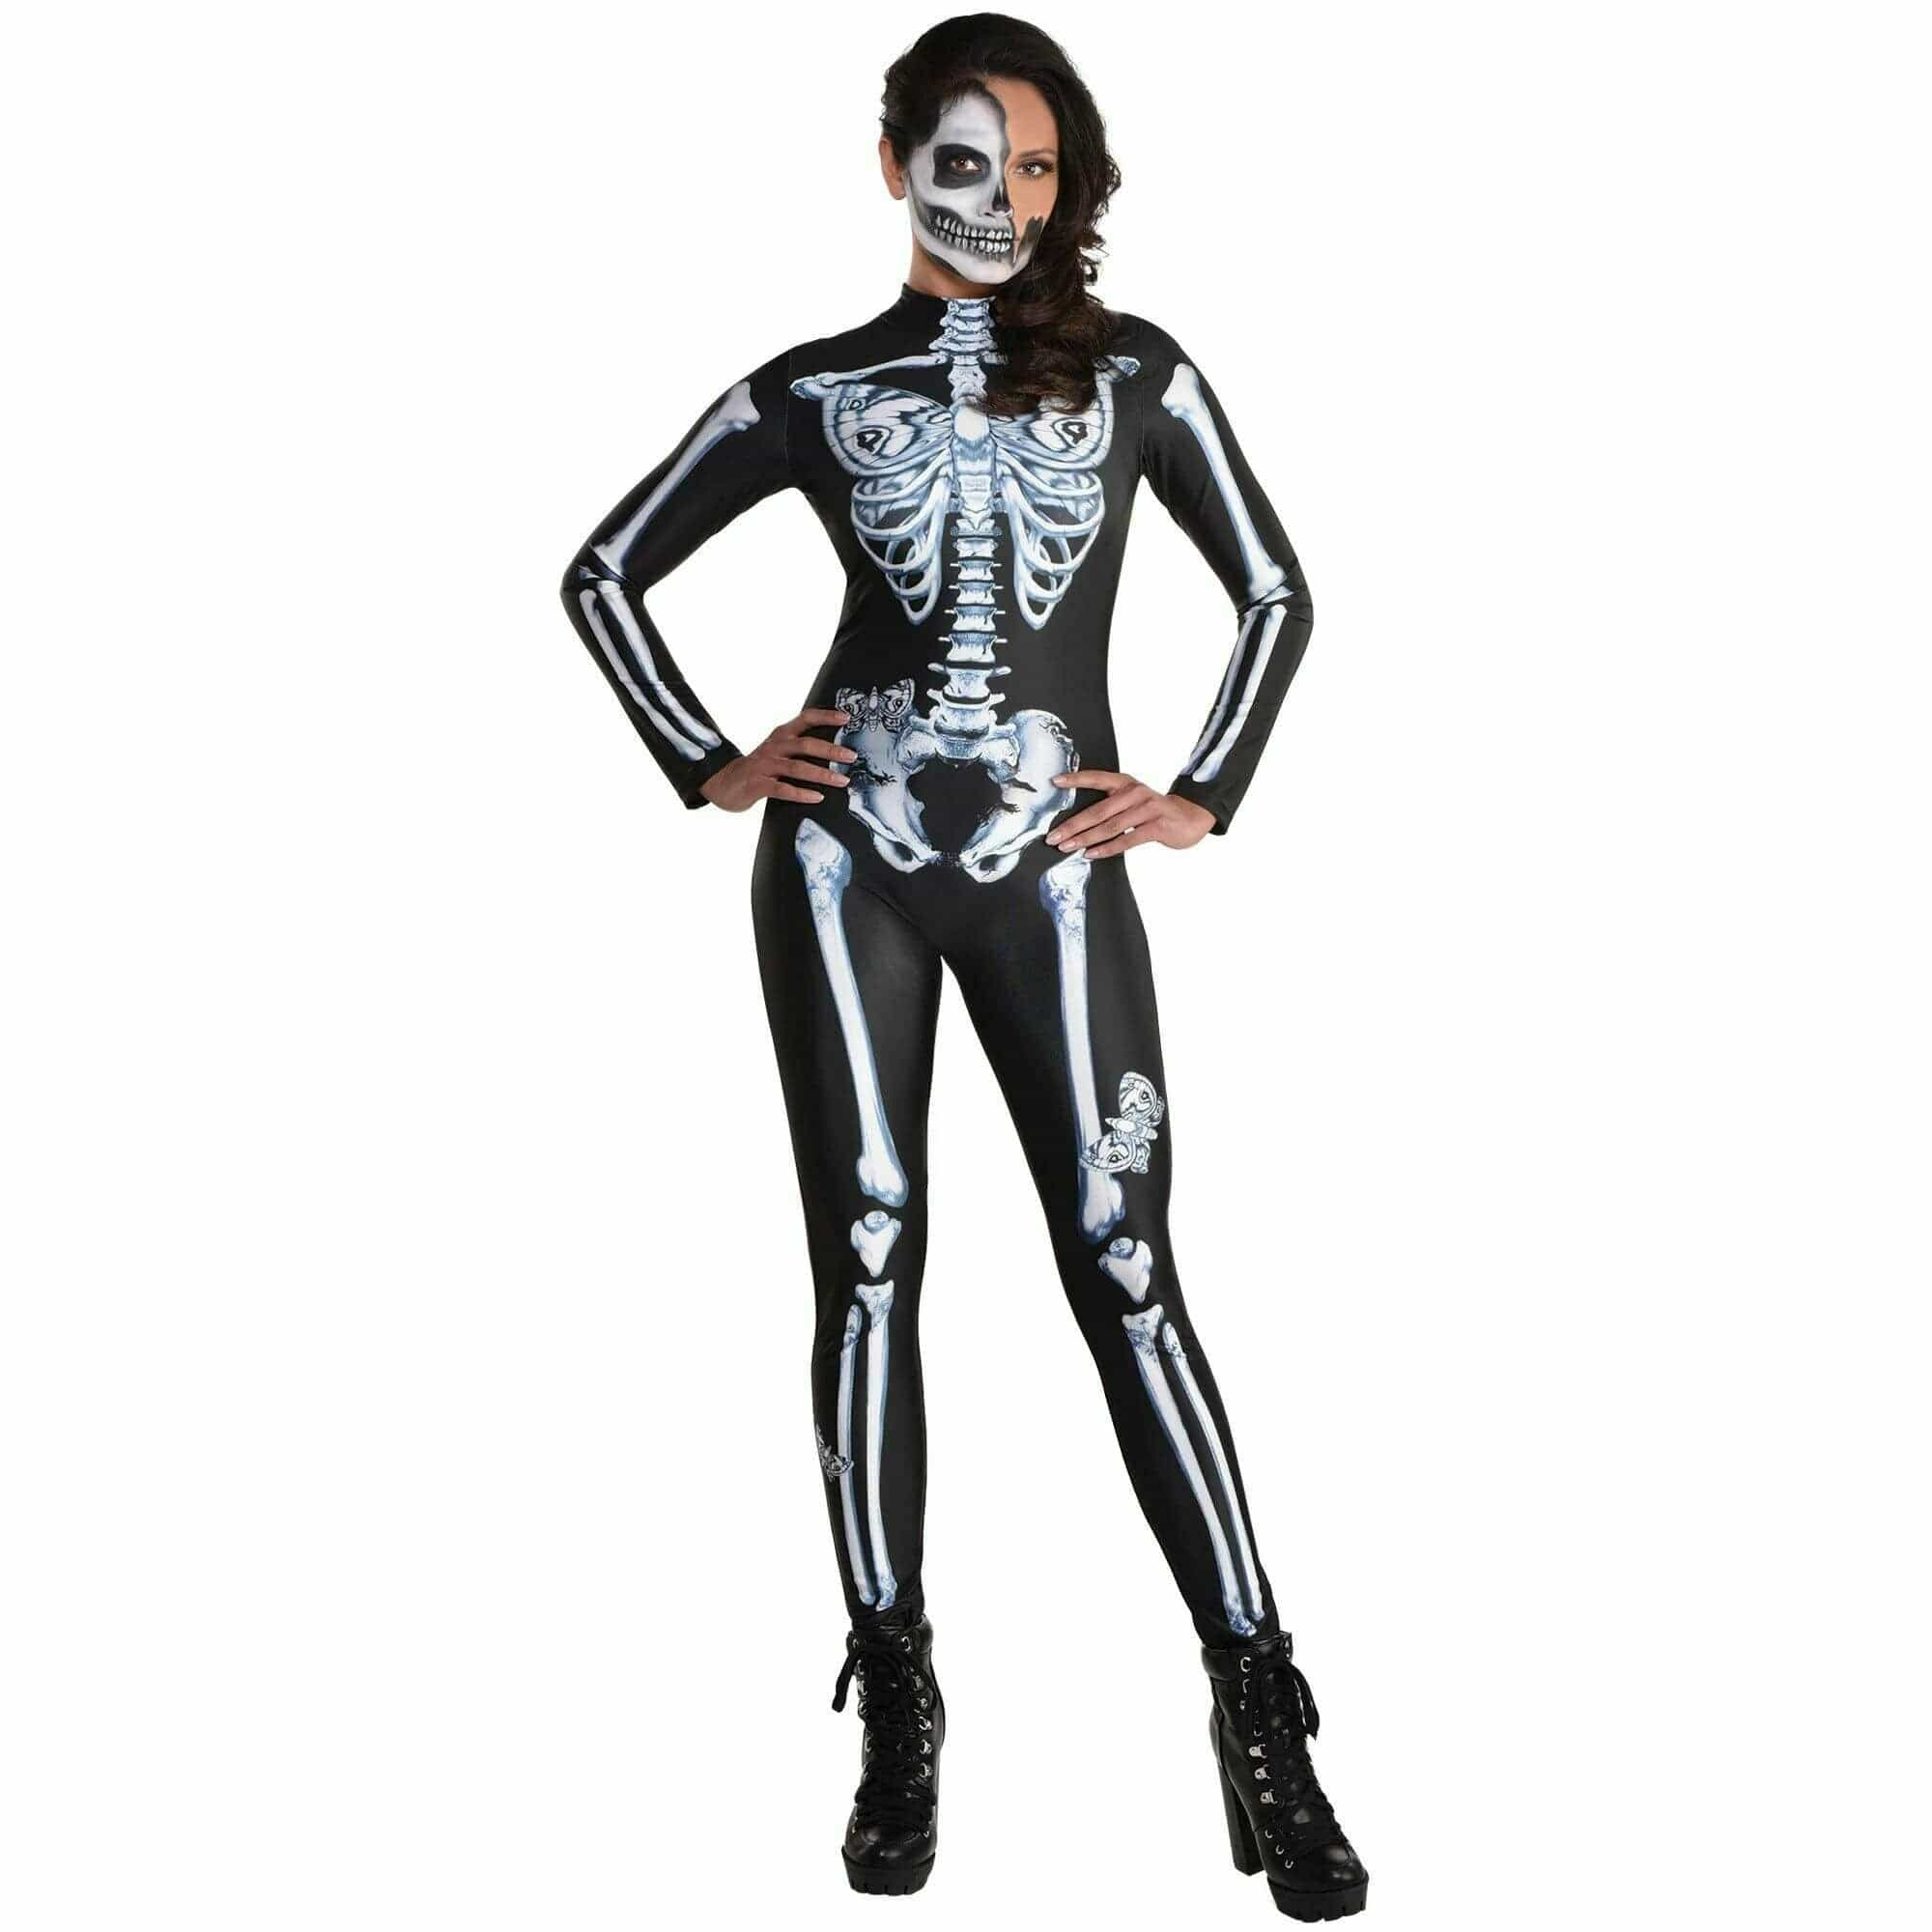 Amscan COSTUMES Small/Medium up to size 8 Skeleton Catsuit